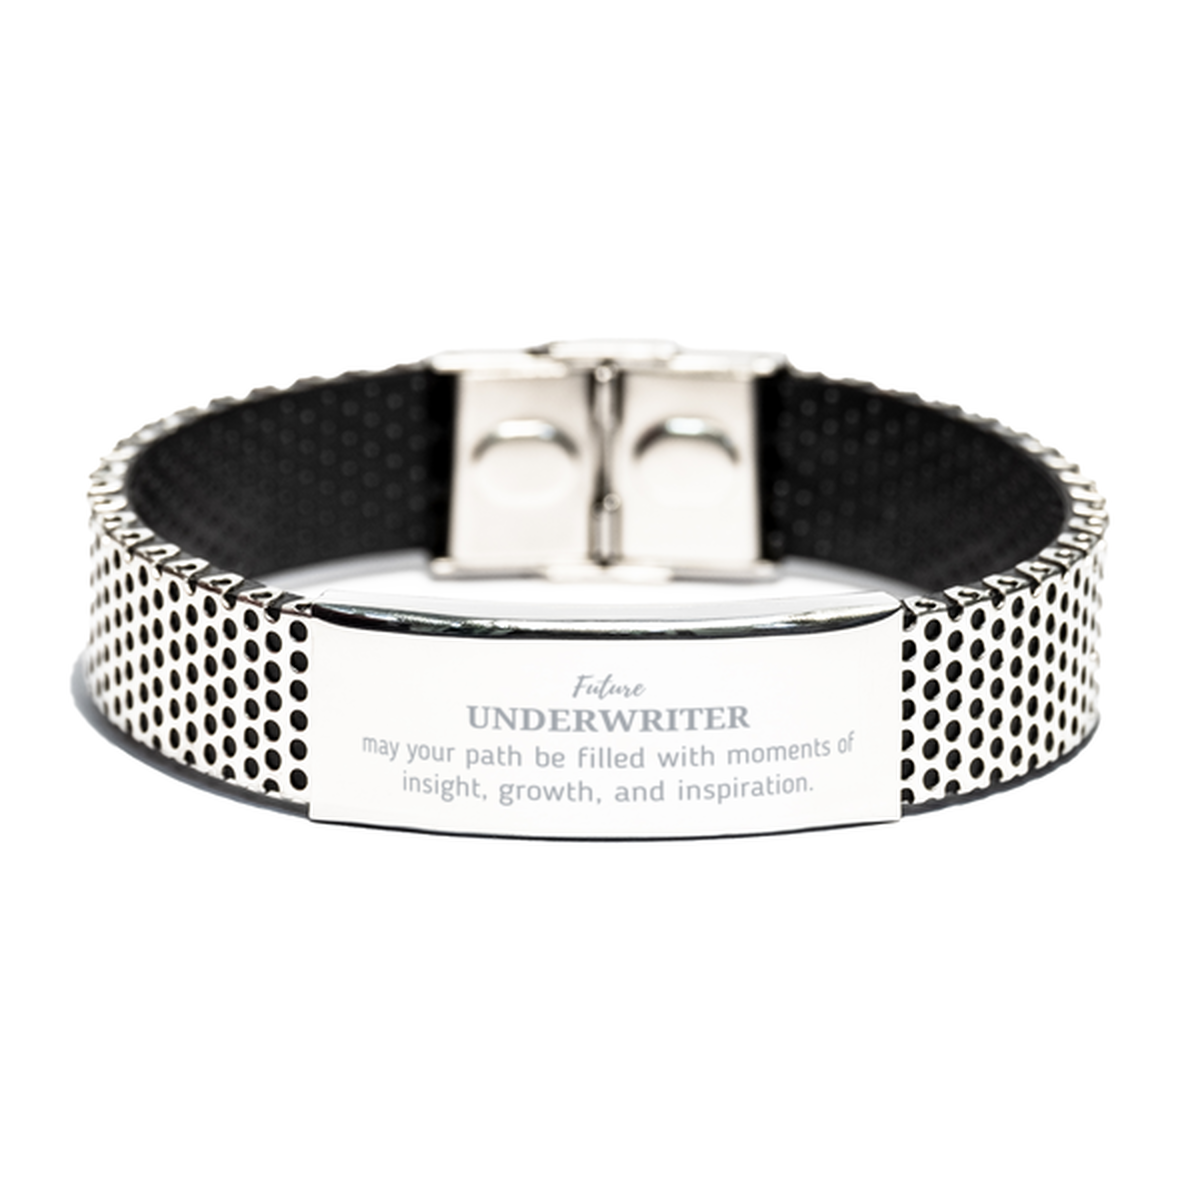 Future Underwriter Gifts, May your path be filled with moments of insight, Graduation Gifts for New Underwriter, Christmas Unique Stainless Steel Bracelet For Men, Women, Friends